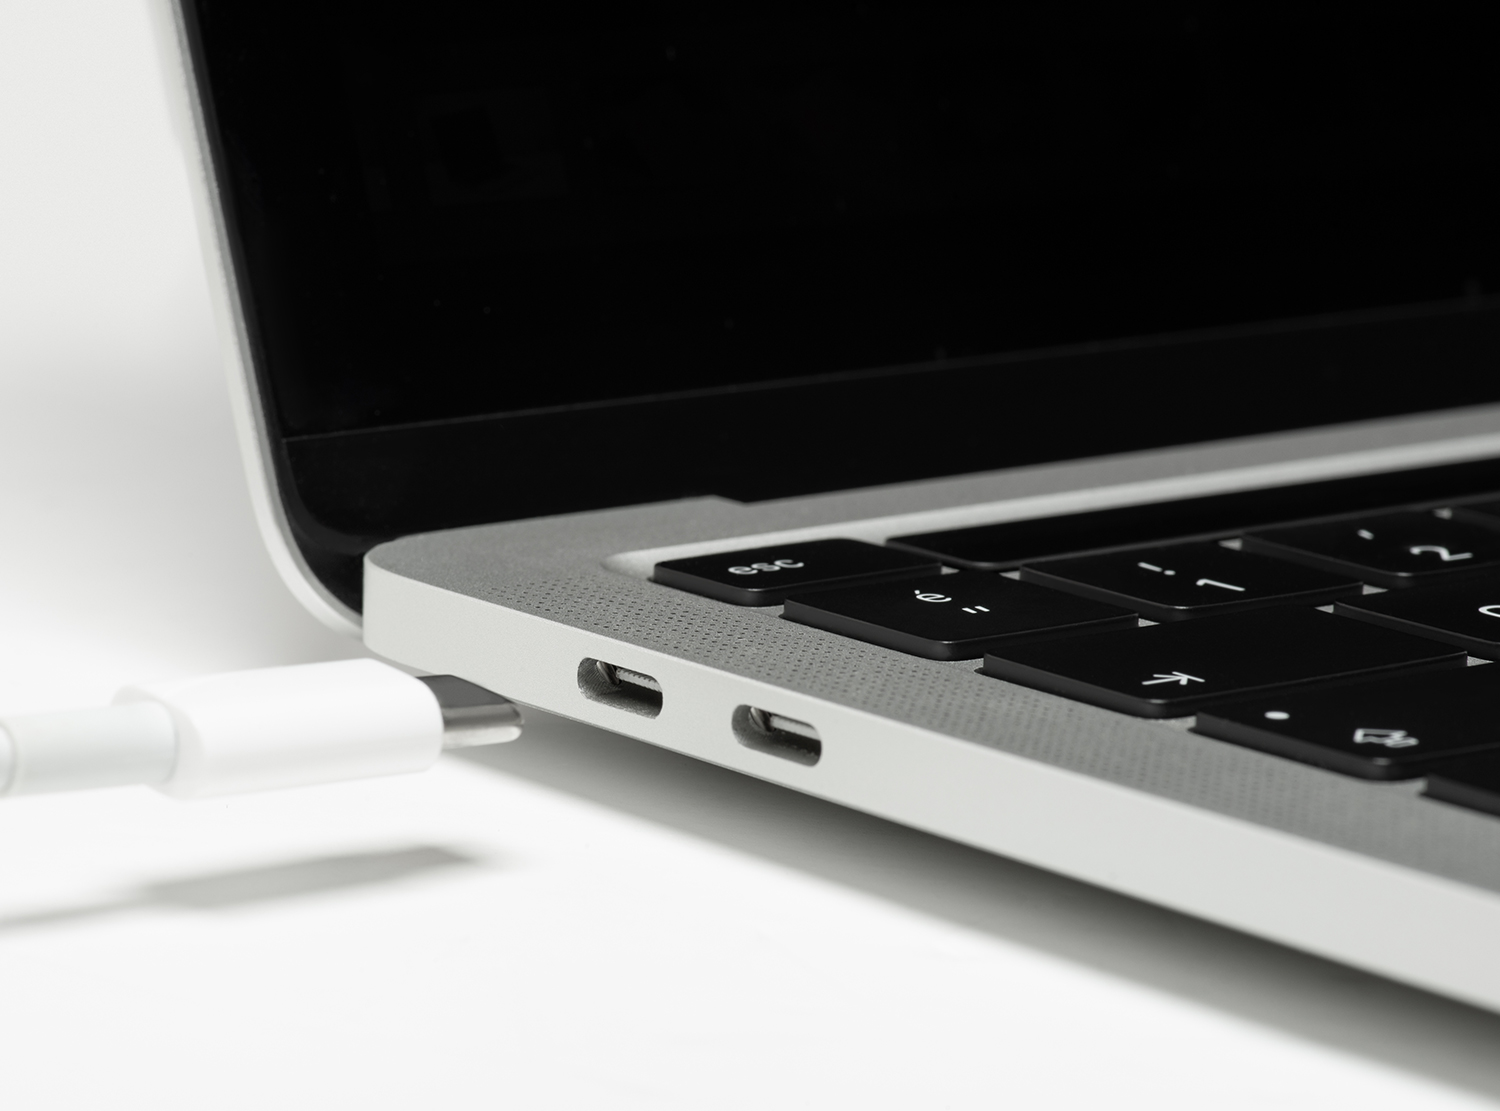 USB-C Laptop Port Symbols: meaning and functionalities